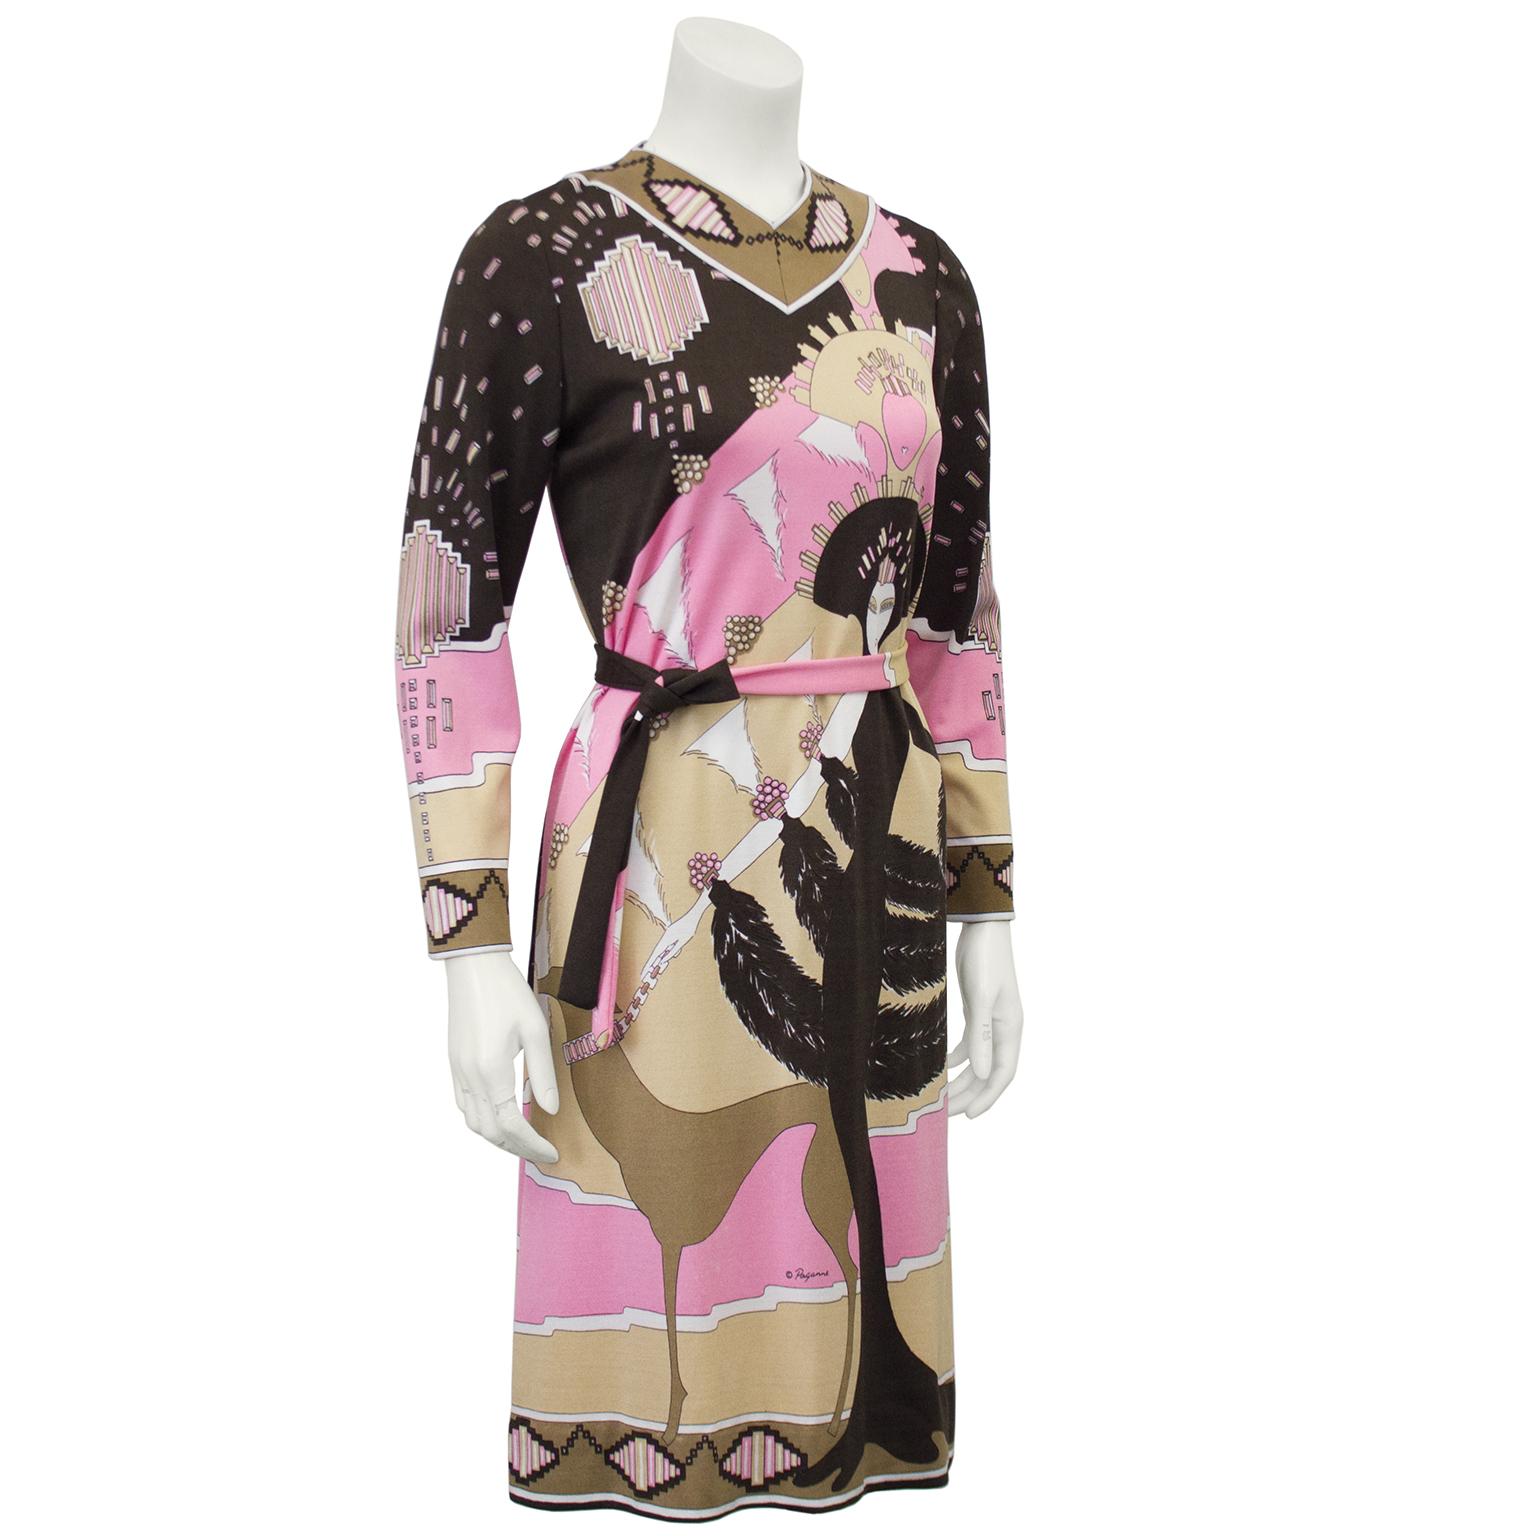 Pink and brown printed rayon Paganne dress from the 1970s. The long sleeve dress has a V neckline and comes with a simple detached rope belt made from matching fabric. The show stopping Art Deco inspired printed fabric features a regal woman with an